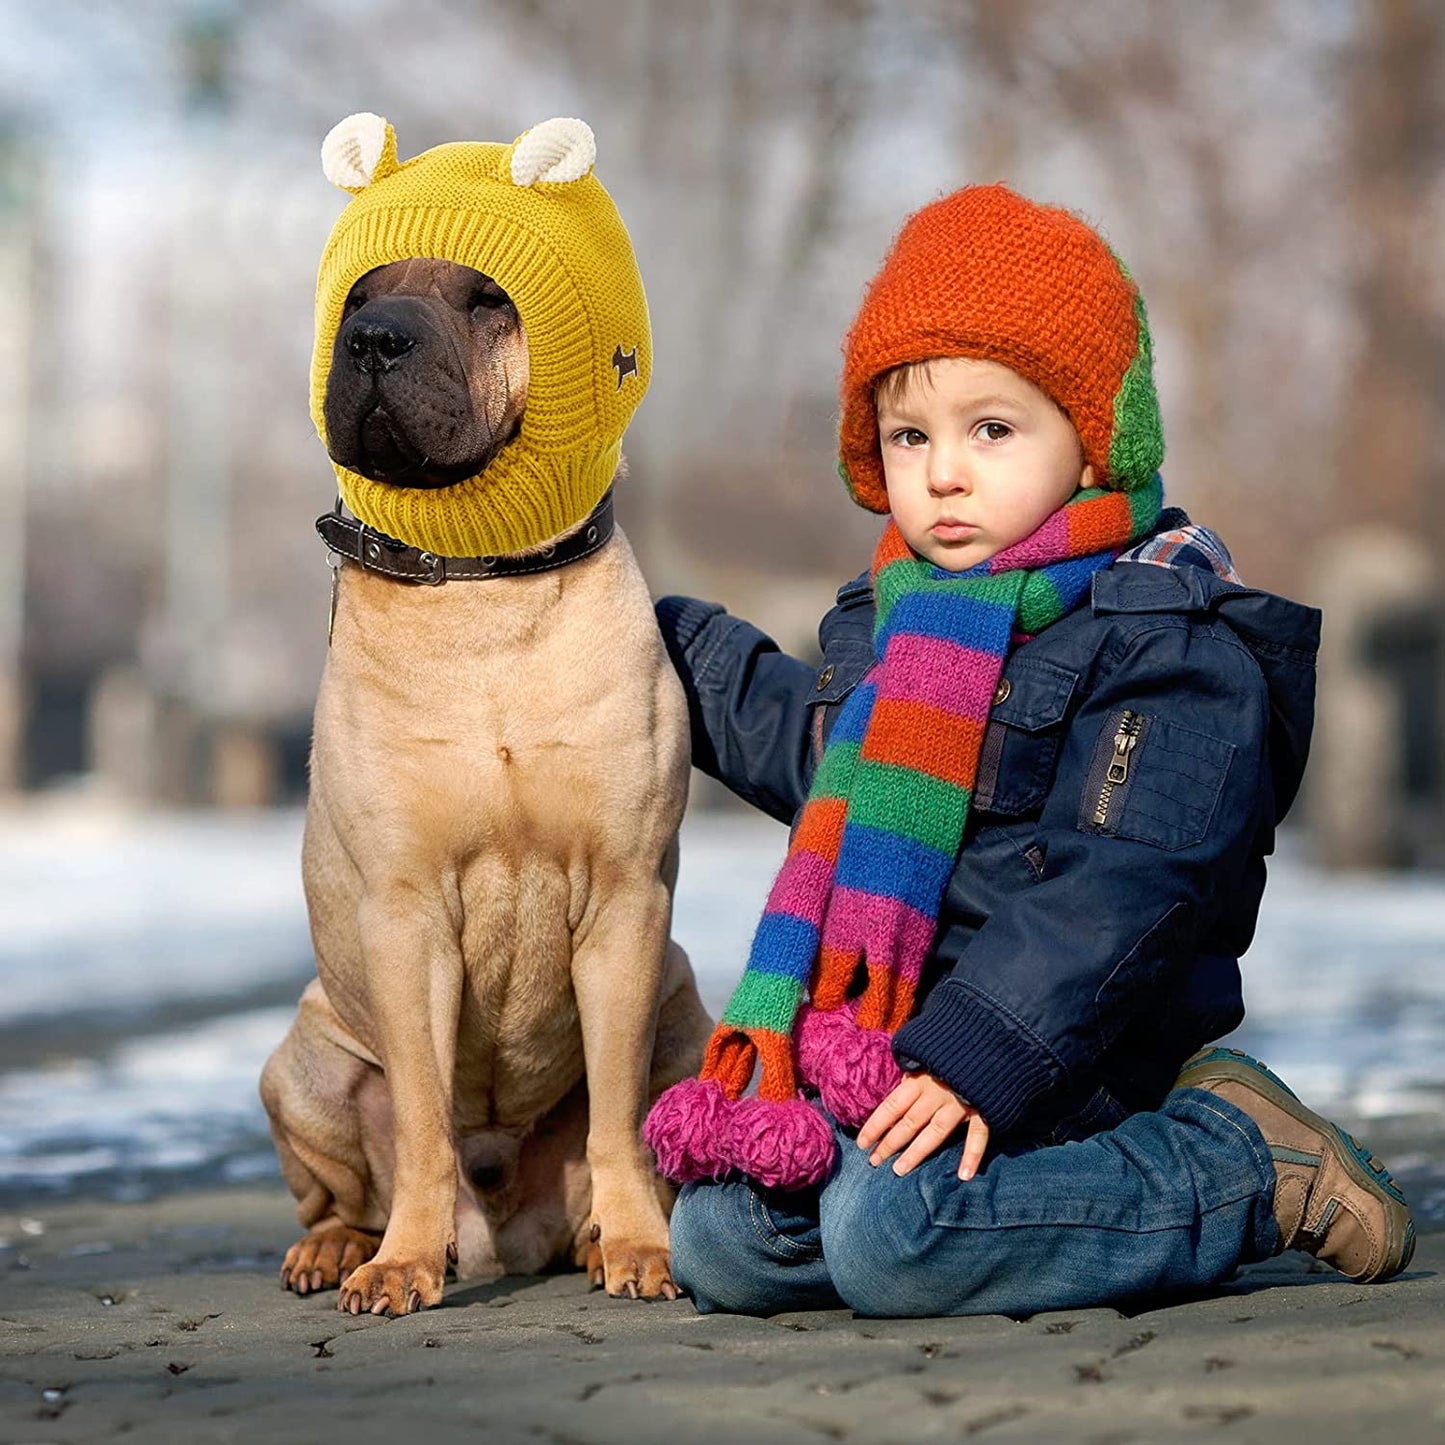 Quiet Ears for Dogs, Dog Ear Muffs Noise Protection Knitted Dog Hats Pet Ears Warm Dog Ear Cover Winter Hat Dog Snood Head Wrap Bunny Costume for Medium to Large Dogs Cats Pets (Yellow) Animals & Pet Supplies > Pet Supplies > Dog Supplies > Dog Apparel Frienda   